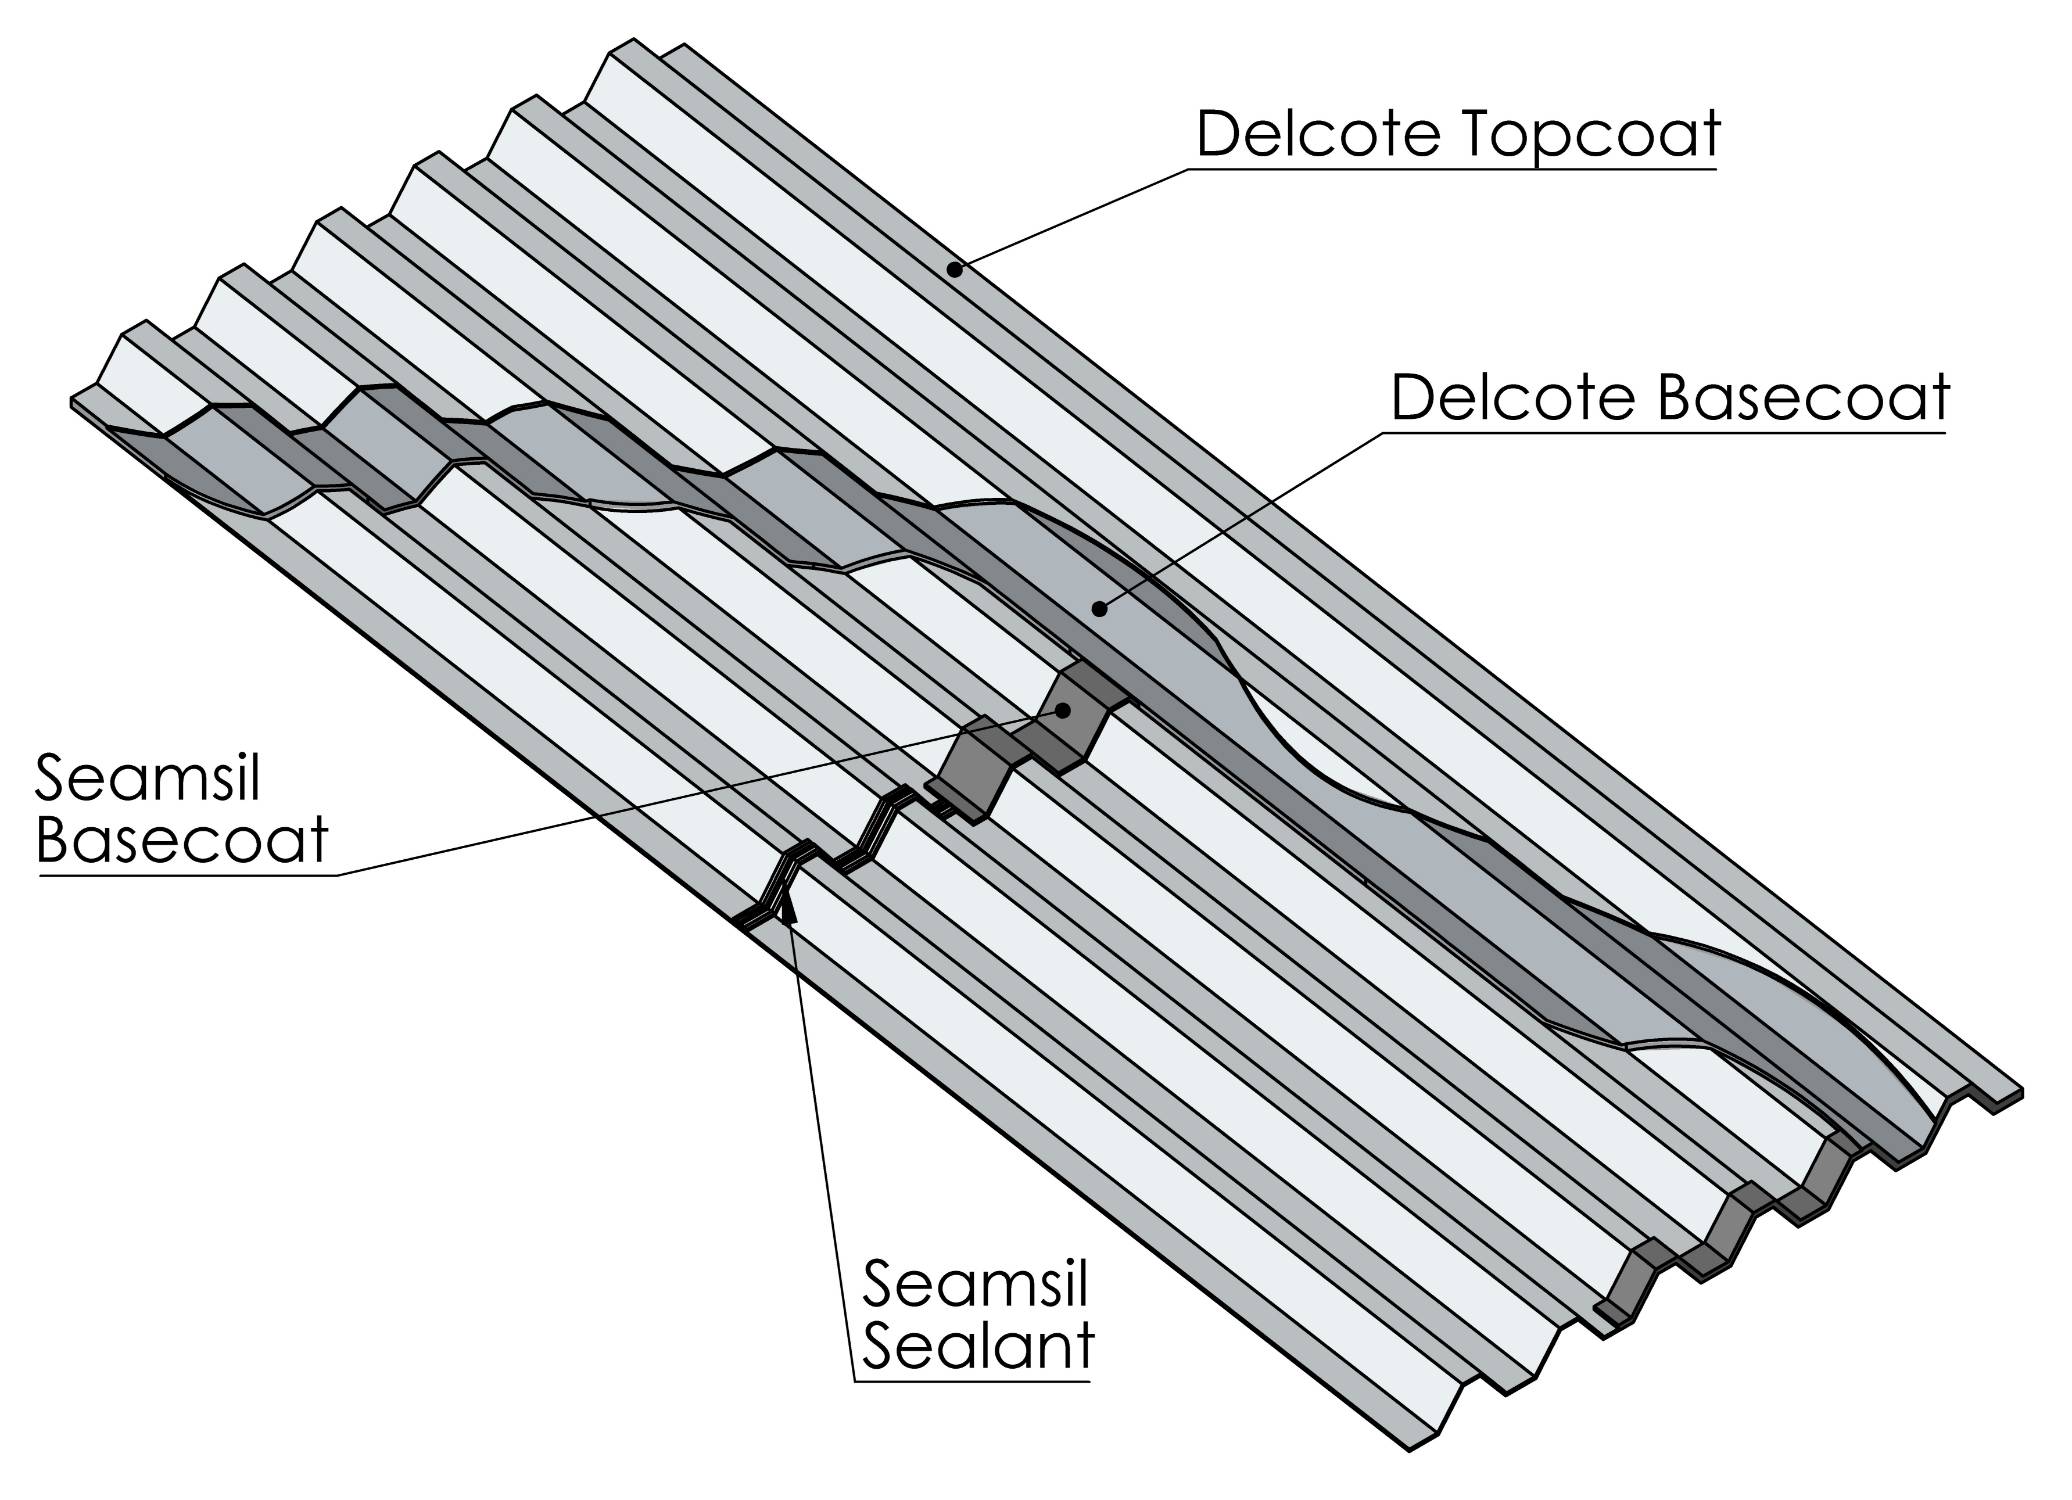 Delcote® 25 Architectural Roof Coating for Metal Roofs (25 Year BBA) - Silicone coating